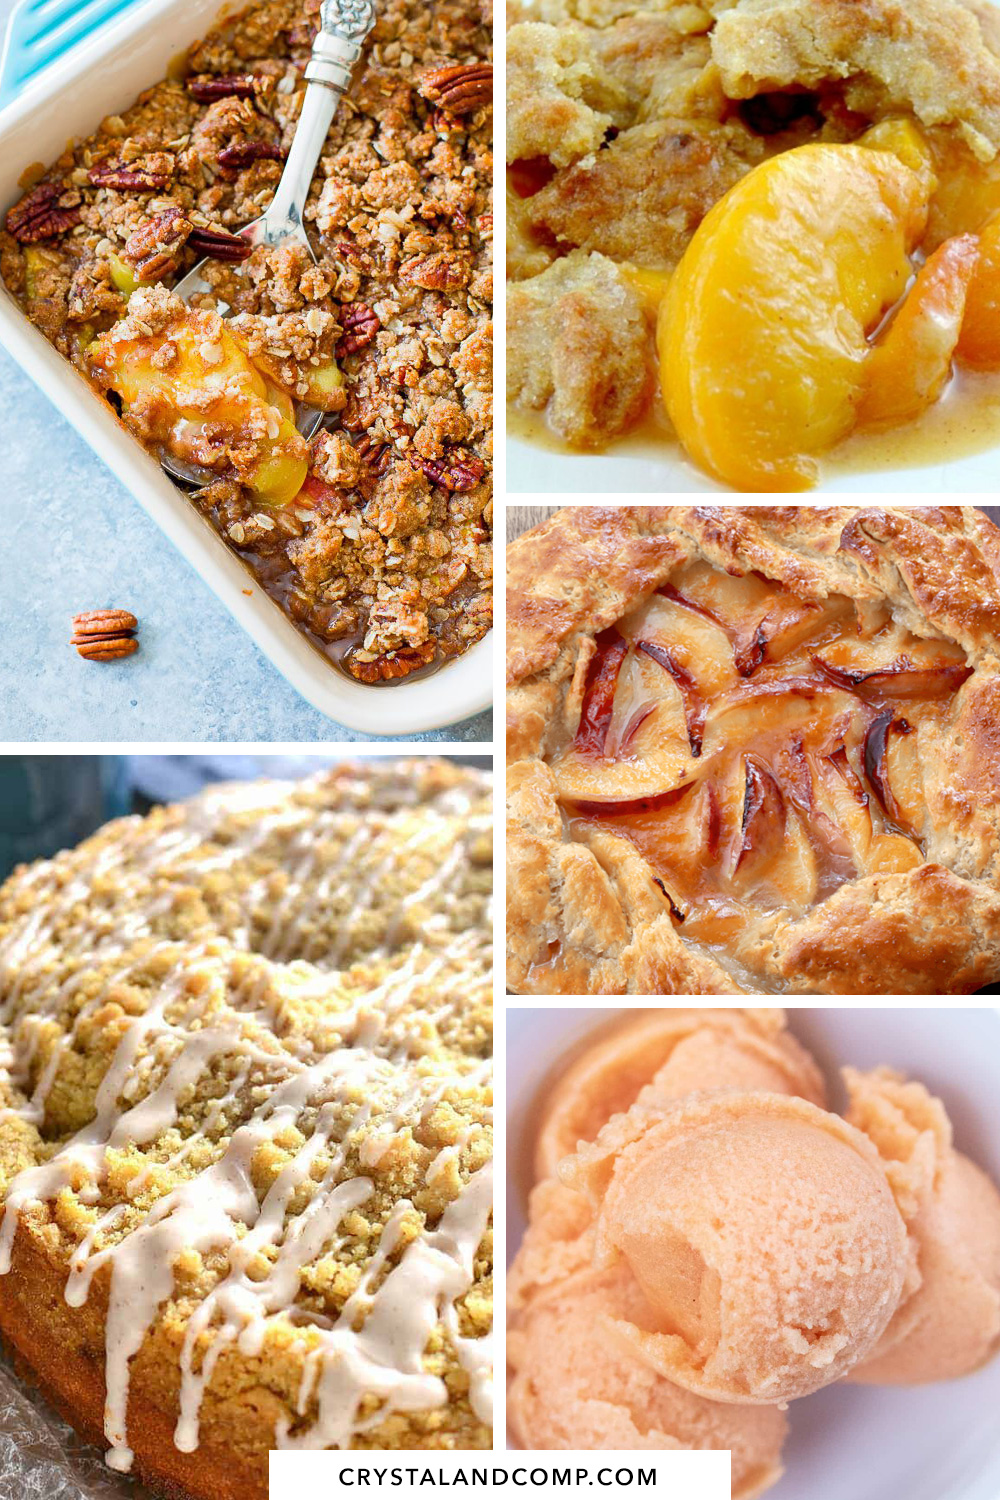 Sweet Peach Recipes That Will Have You Begging for More